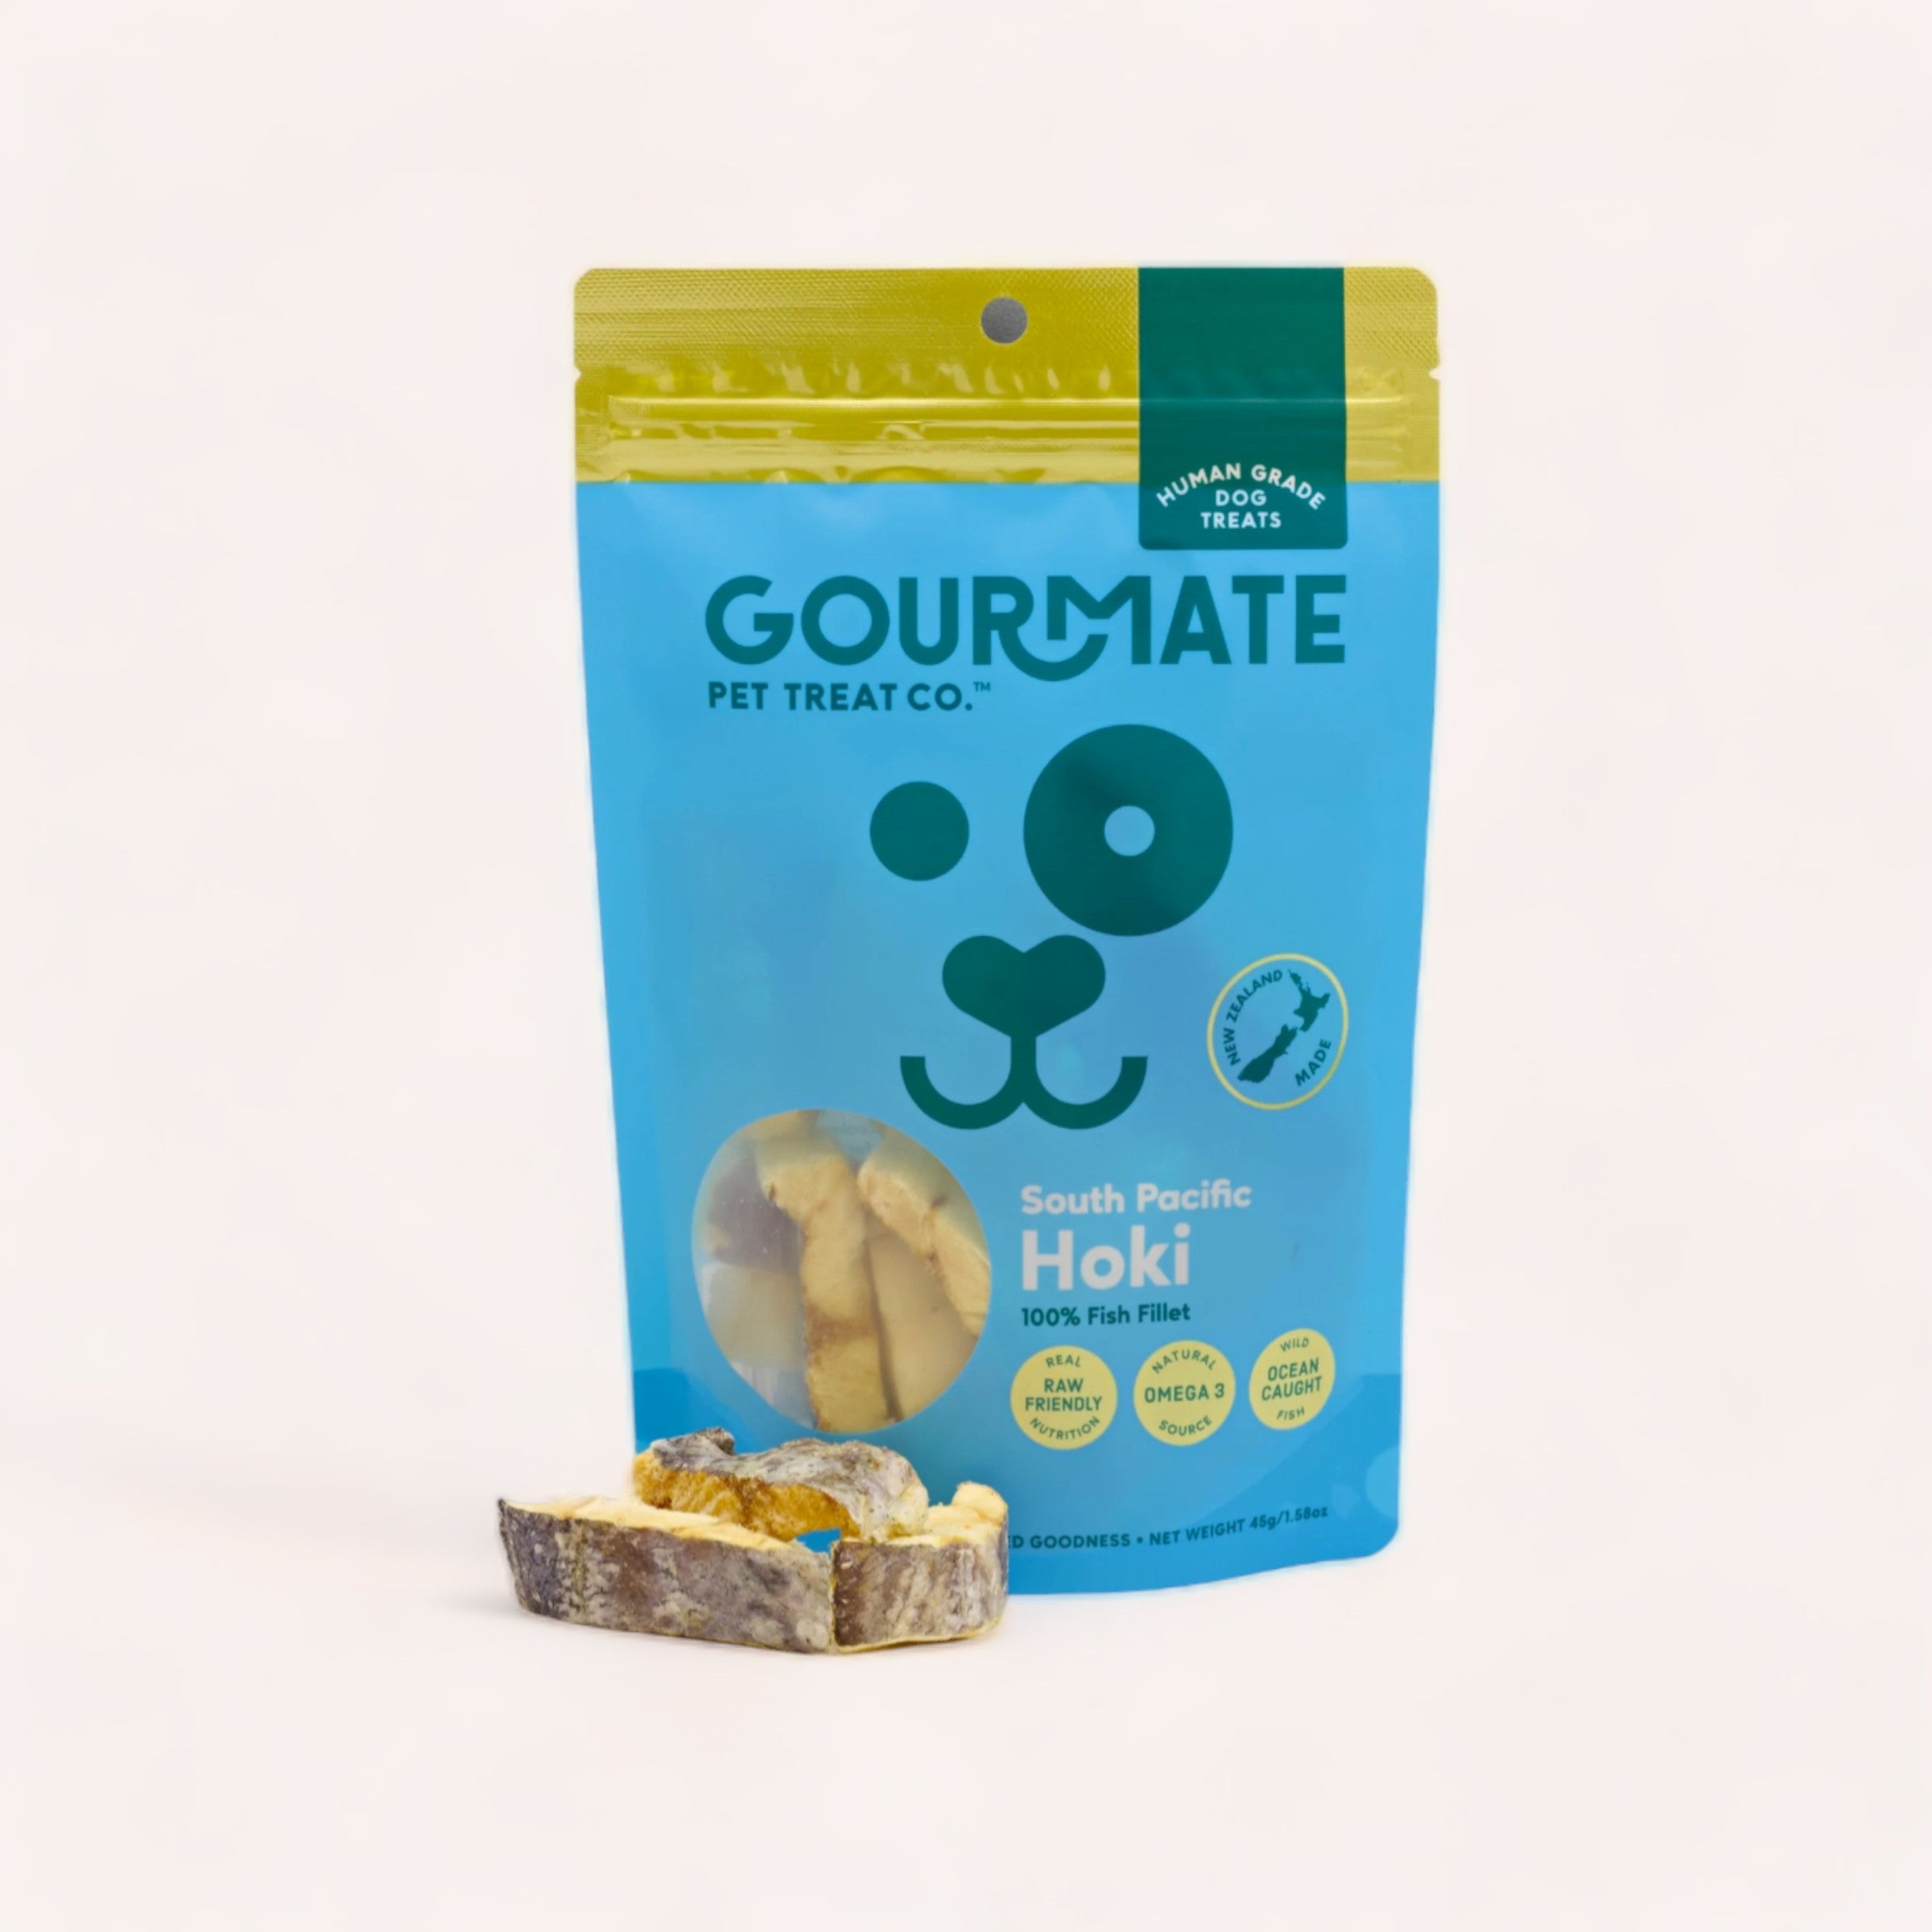 A packet of Gourmate Pet Treat Co. South Pacific Hoki Treats, rich in omega-3, against a plain background, with a few treats displayed in front.